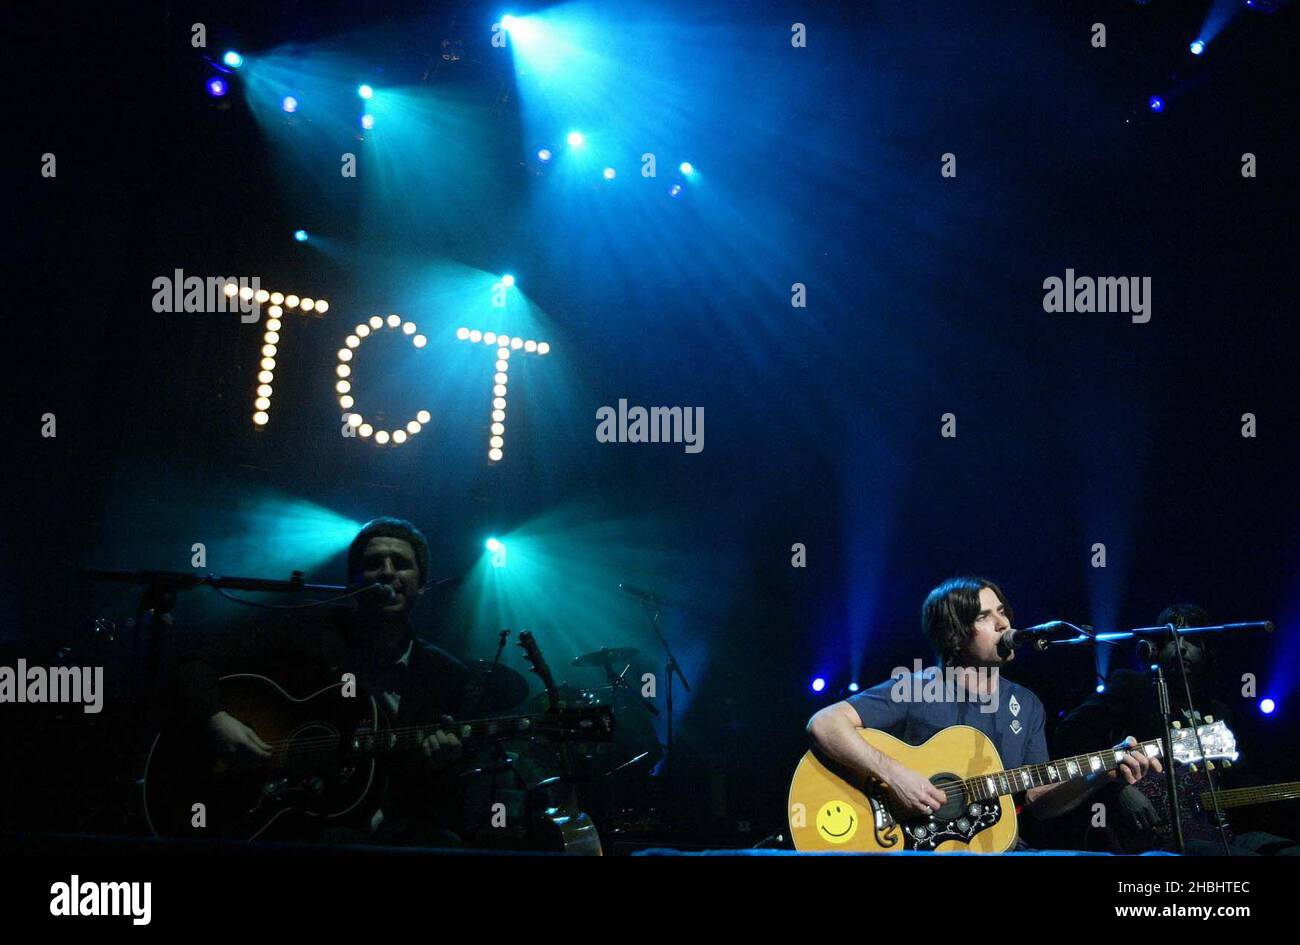 Noel Gallagher and Kelly Jones (Stereophonics) perform live on stage at the Teenage Cancer Trust Concert at the Royal Albert Hall London. Live. Half Length. Stock Photo